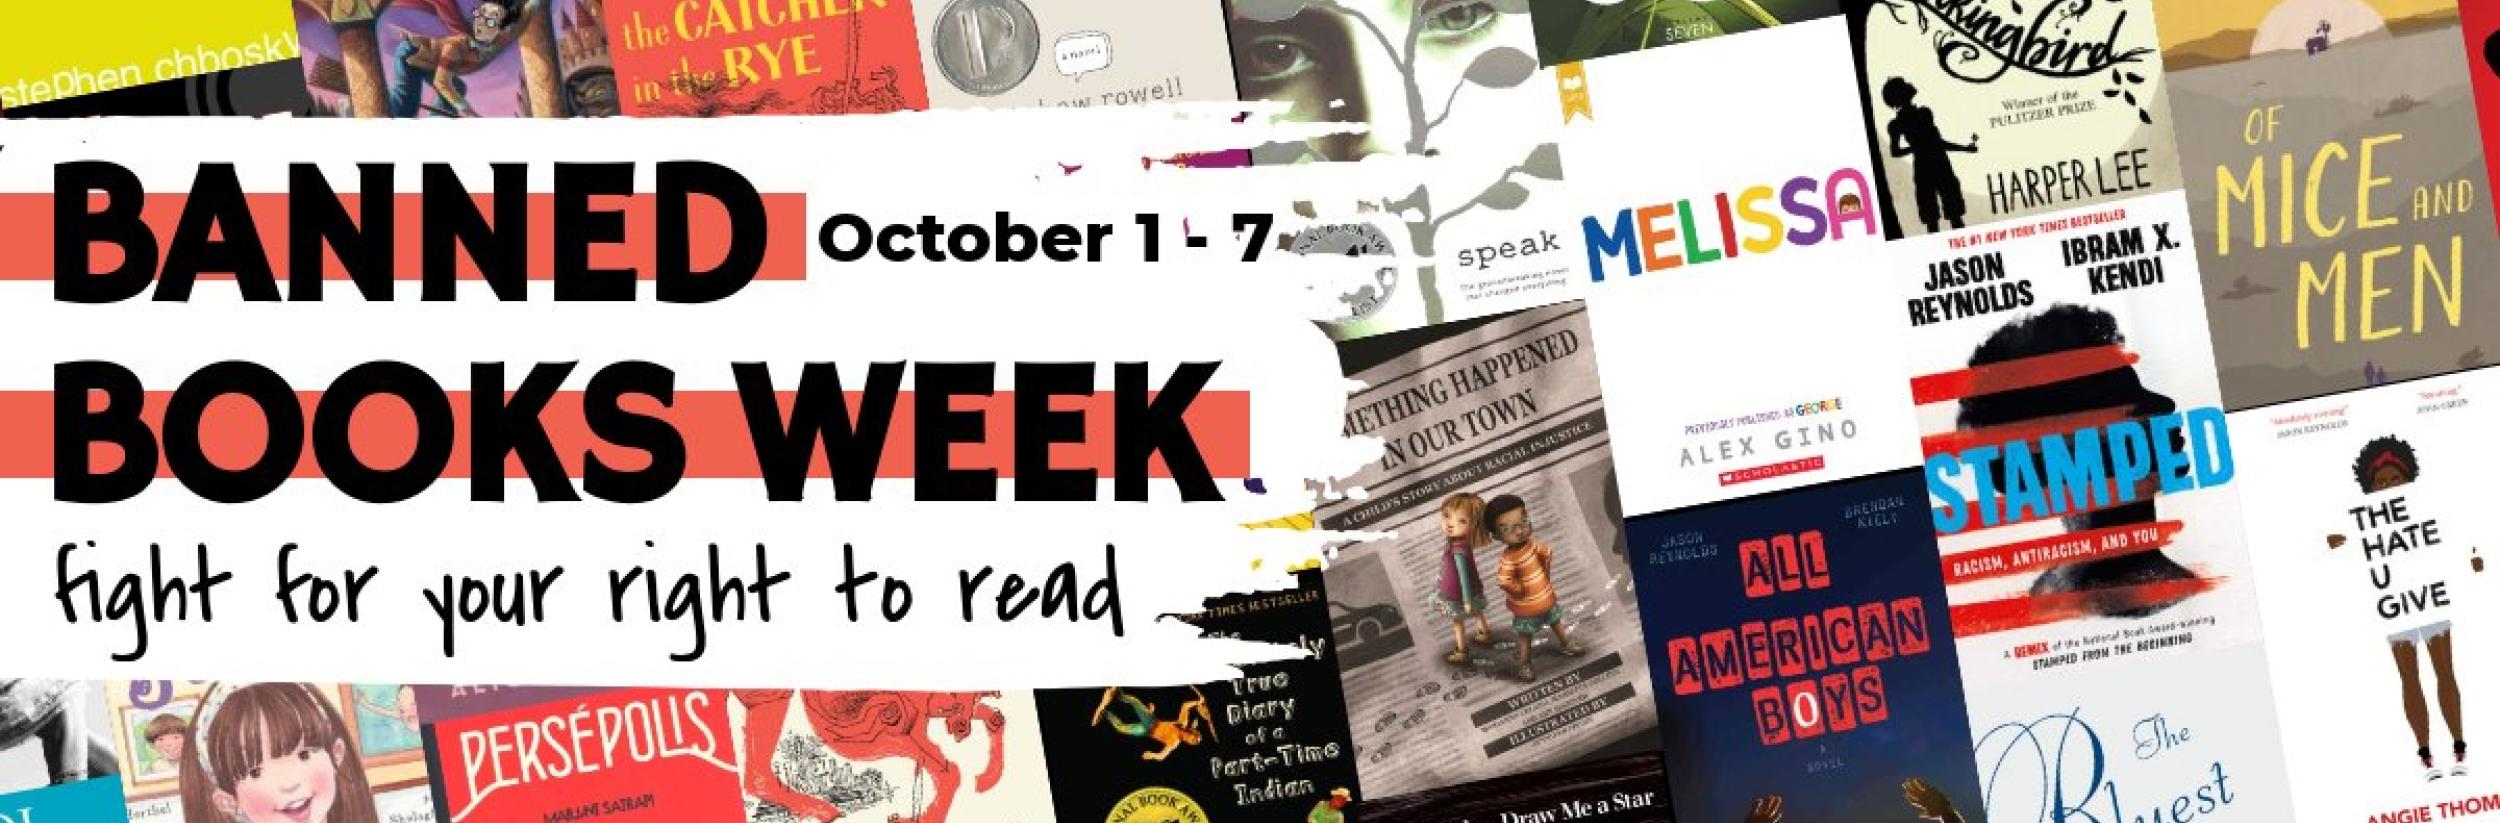 Image for "Banned Books Week 2023 - All"